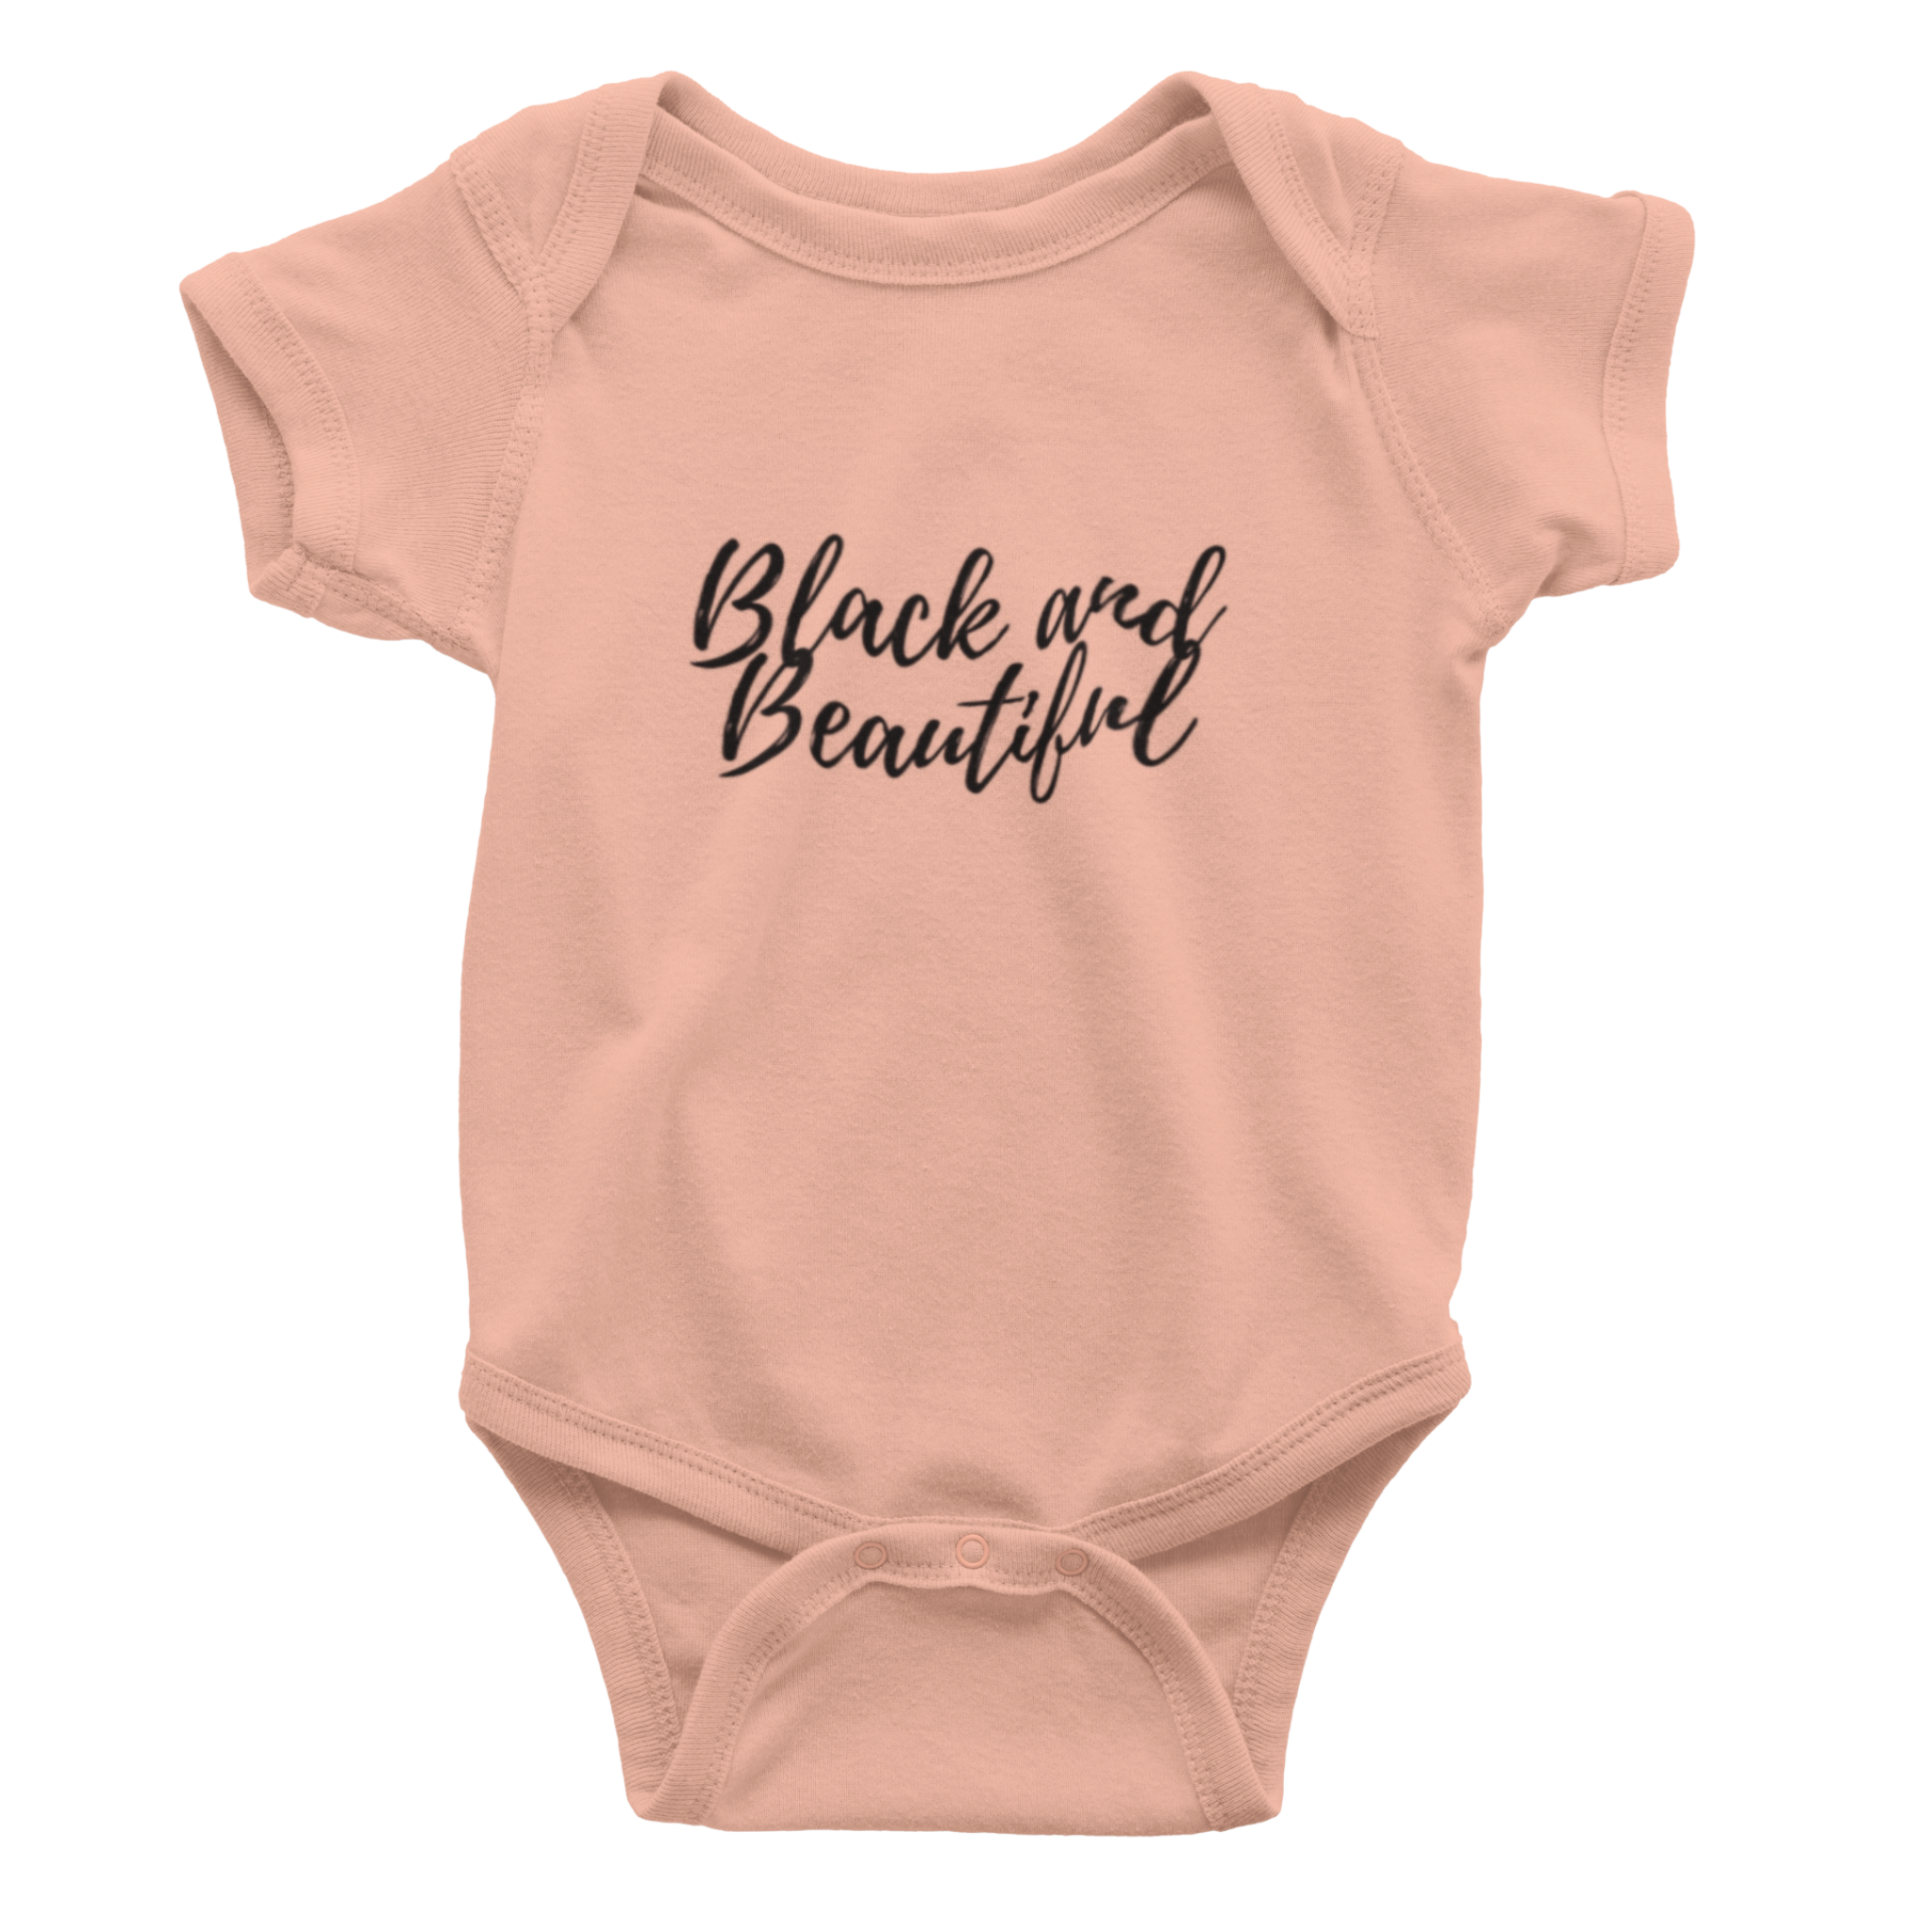 Black Professional Musician PJs sizes 2T-7Y – Indy Mindy